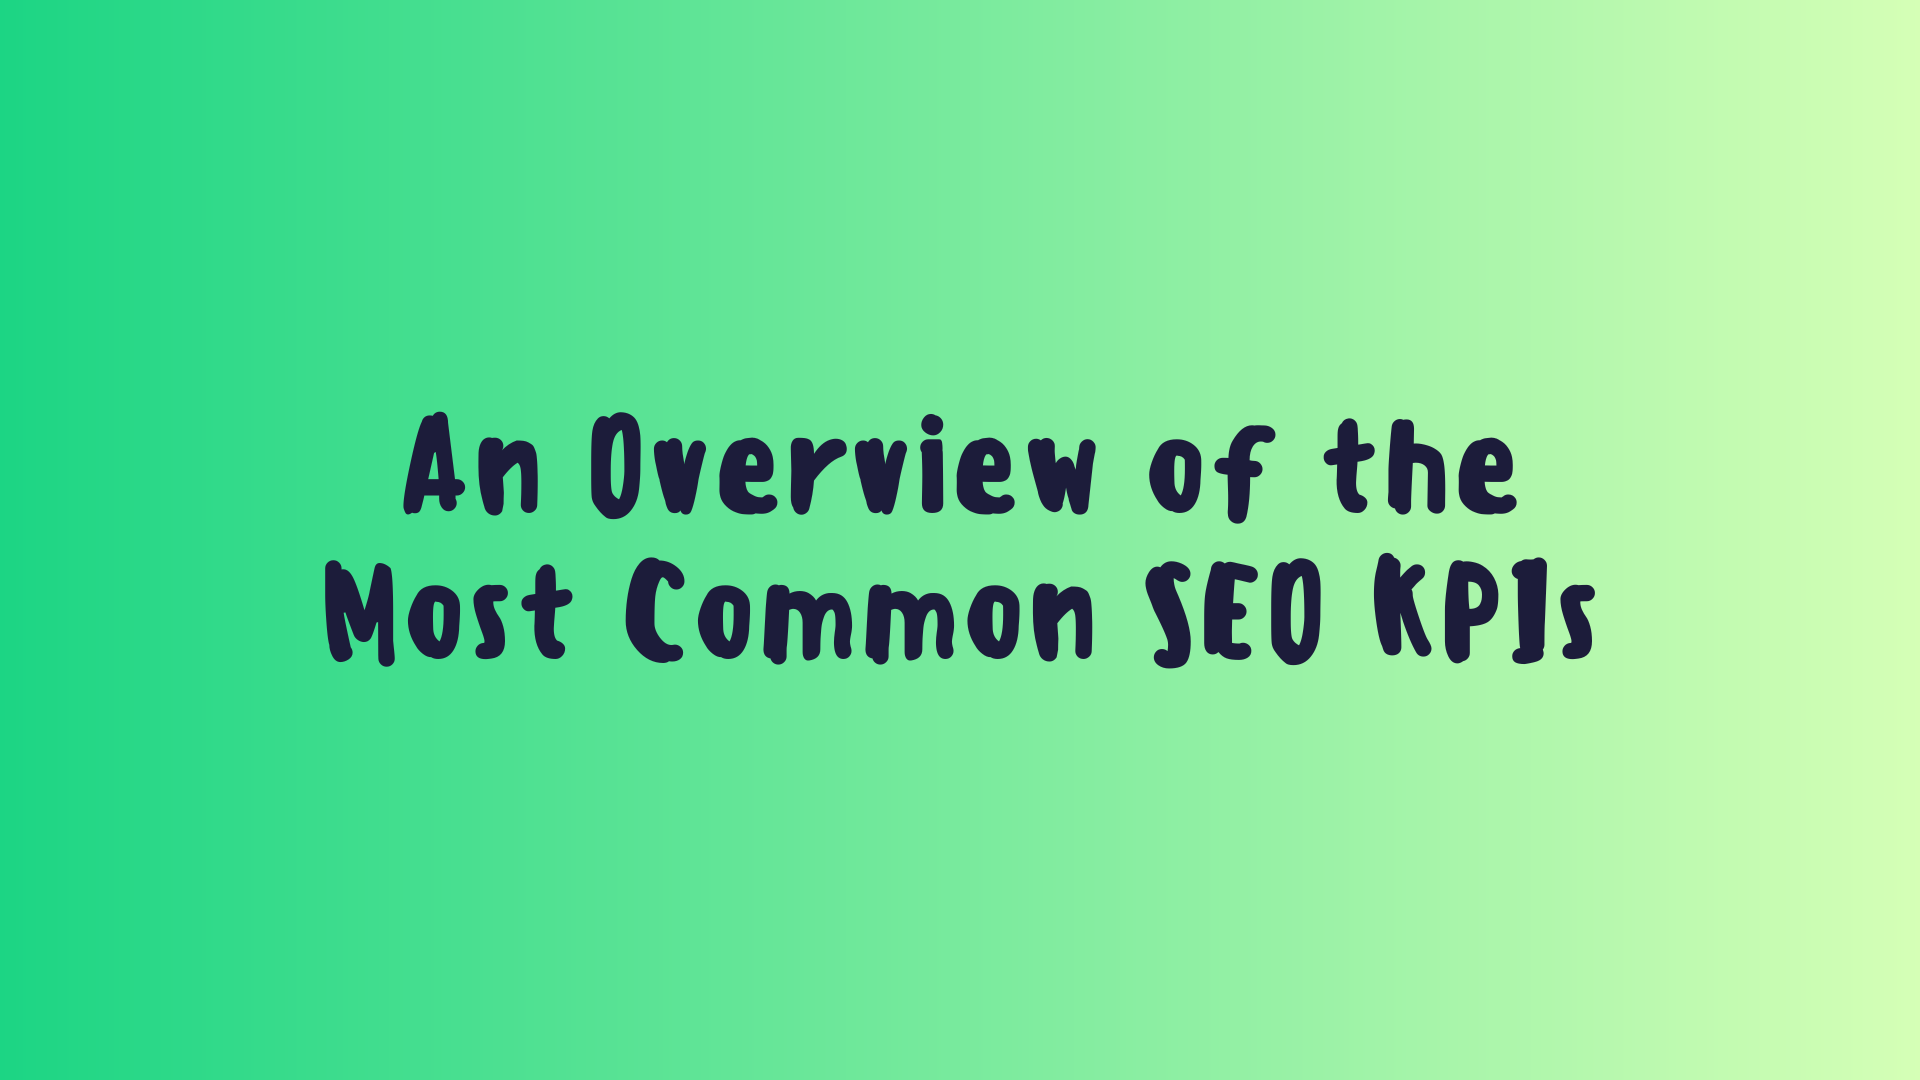 An Overview of the Most Common SEO KPIs